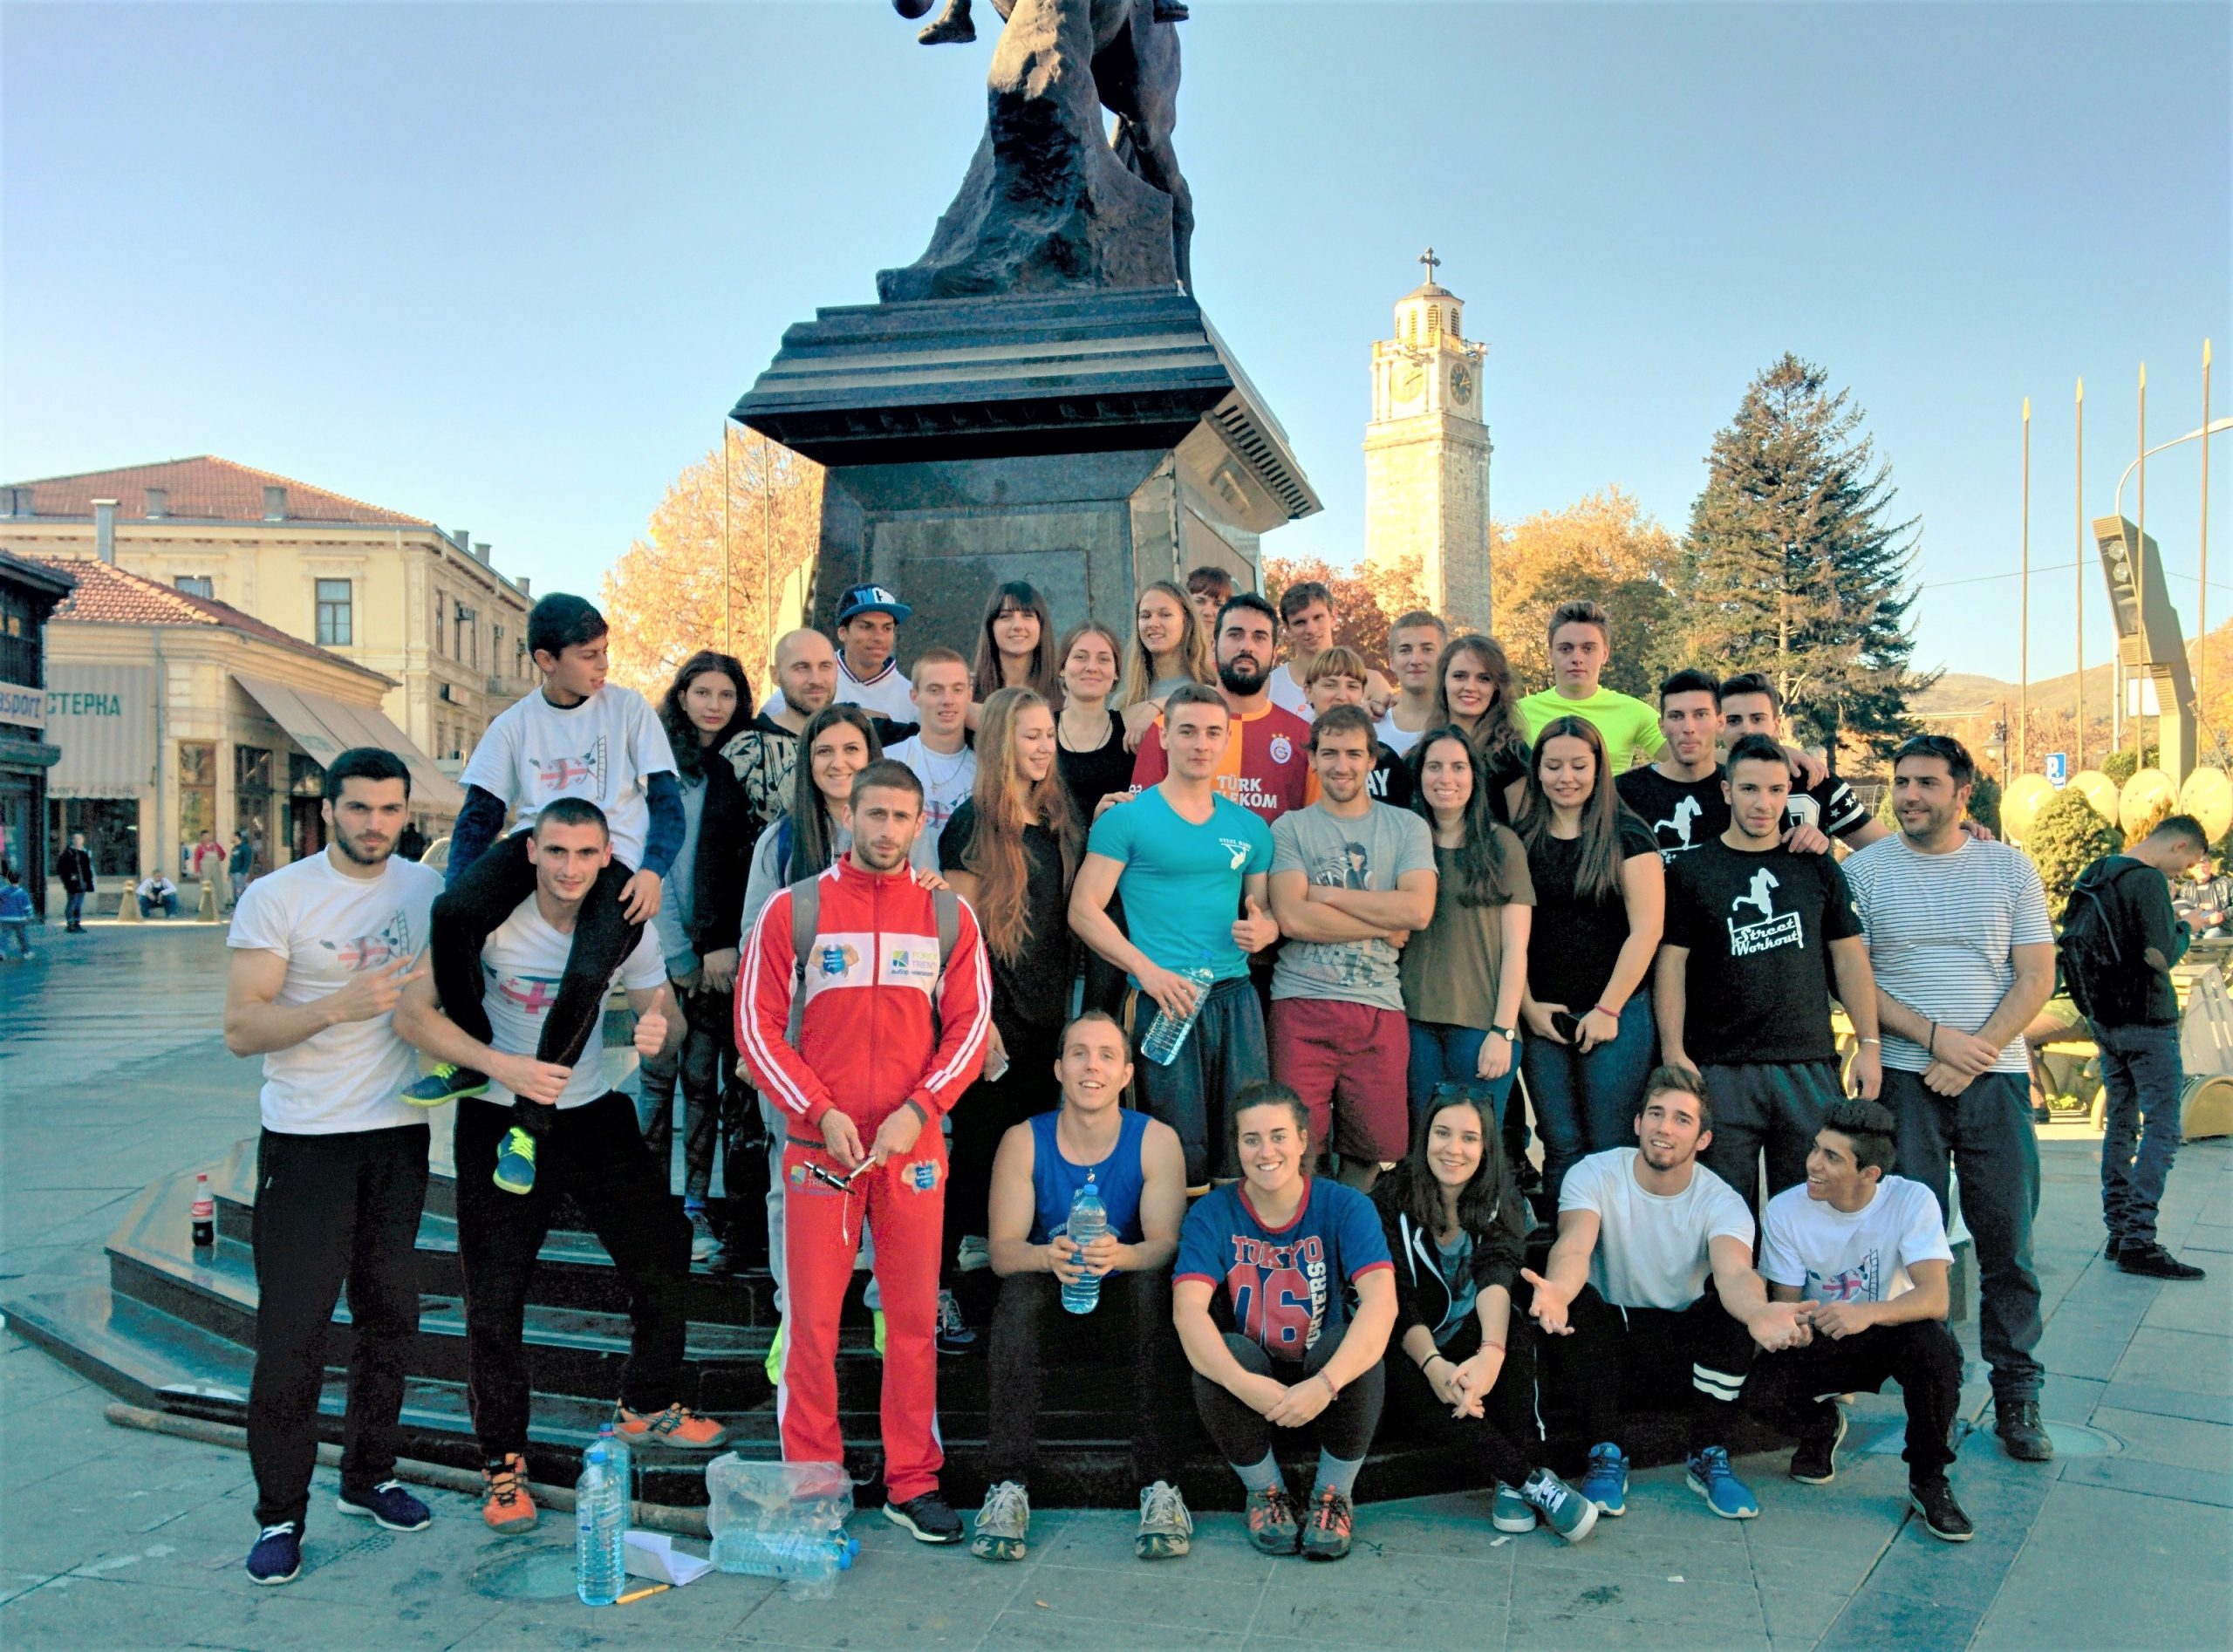 Review on “Street Workout – Each One Teach One” Youth Exchanges